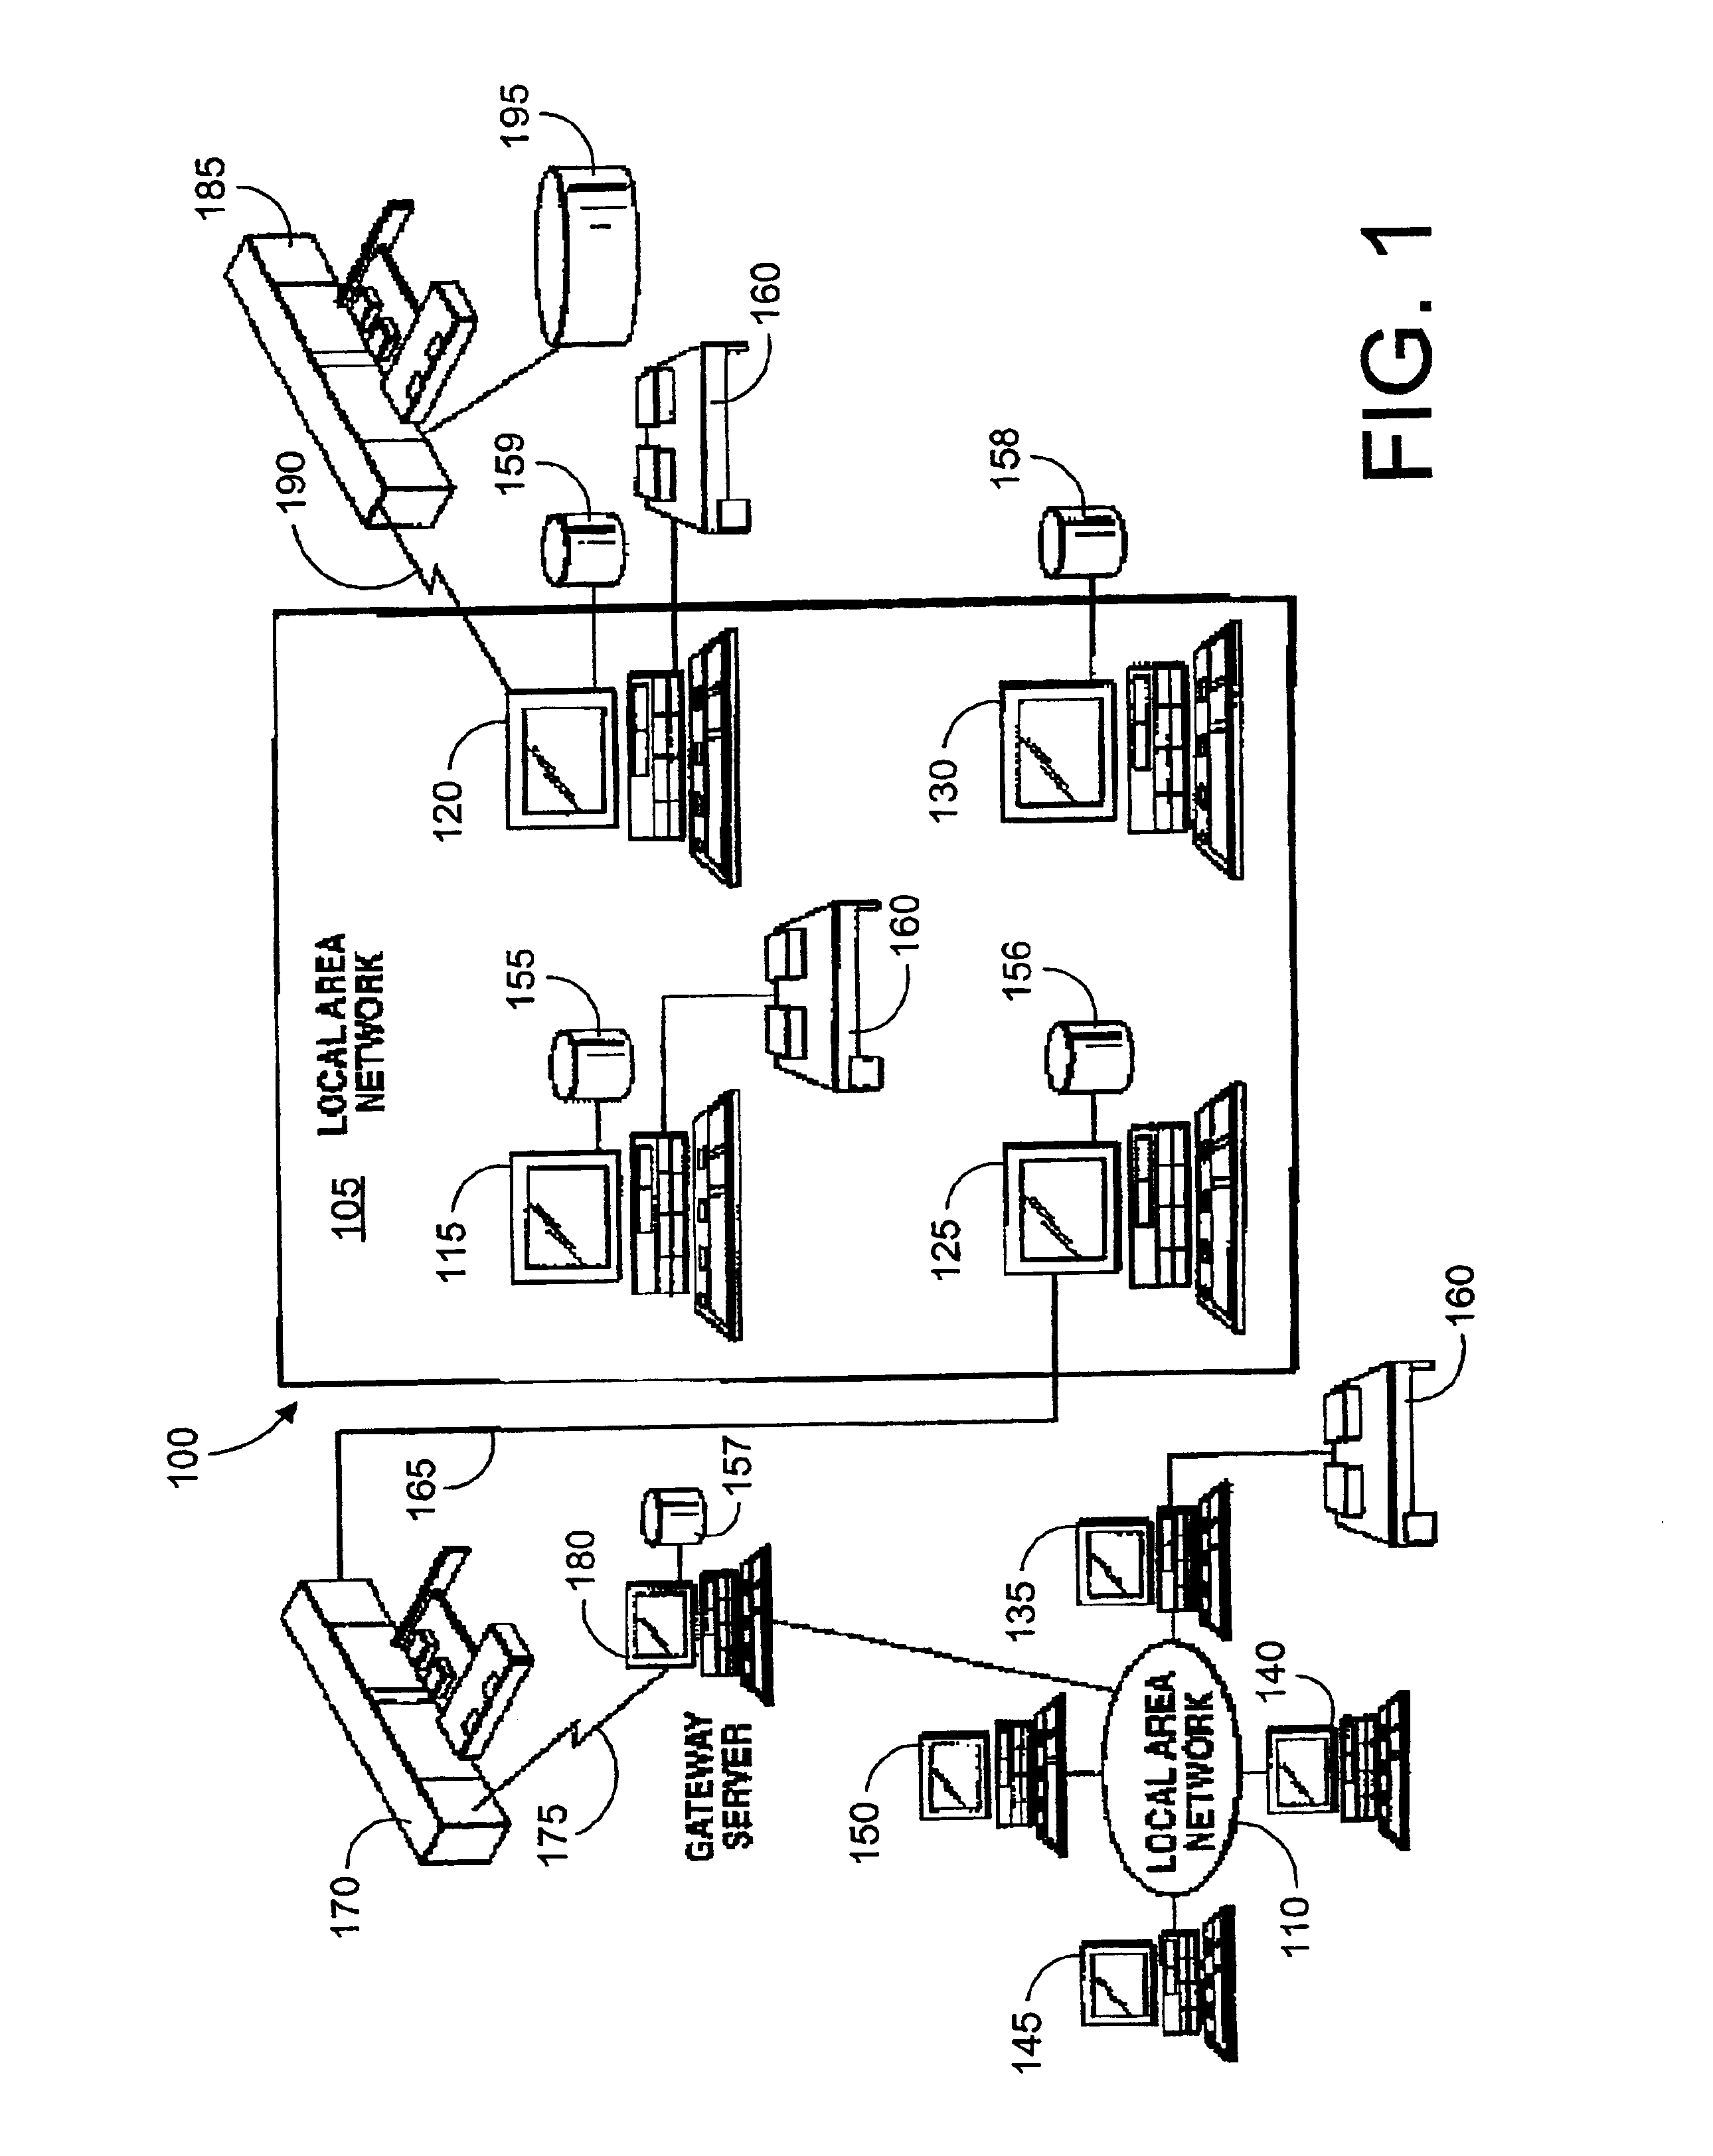 Method and system for managing parallel data transfer through multiple sockets to provide scalability to a computer network